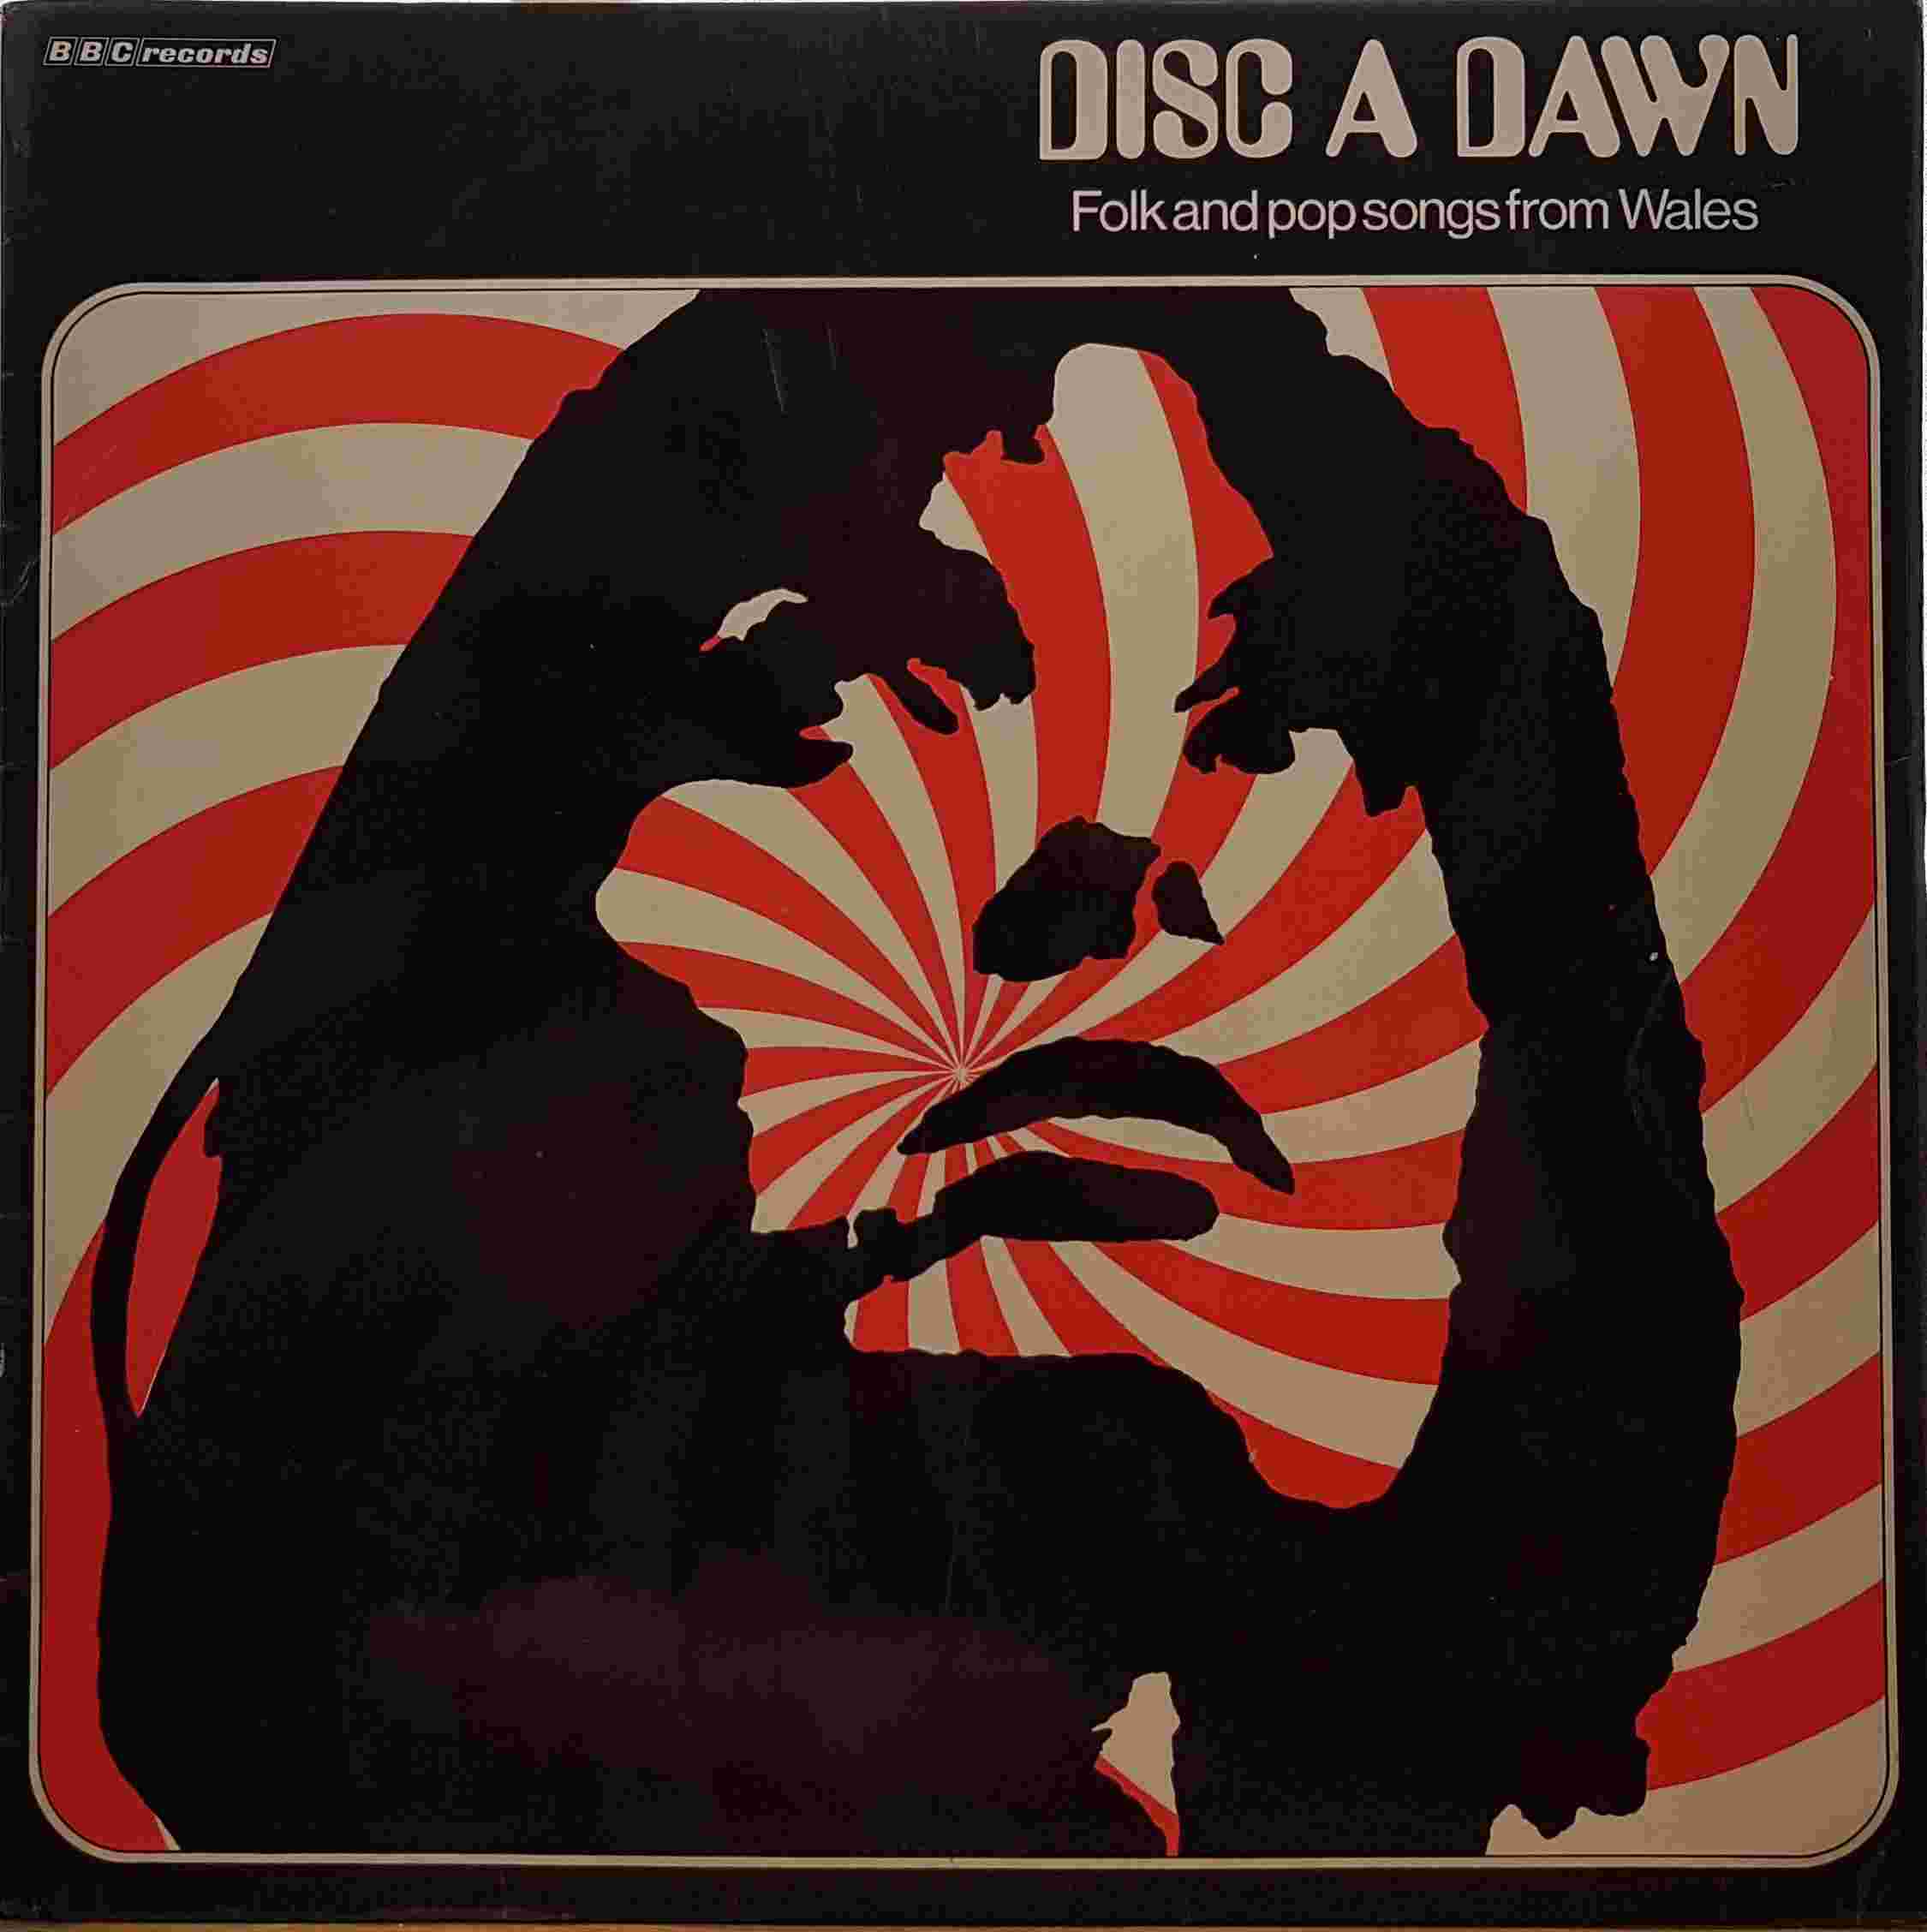 Picture of REC 65 Disc a dawn by artist Various from the BBC albums - Records and Tapes library